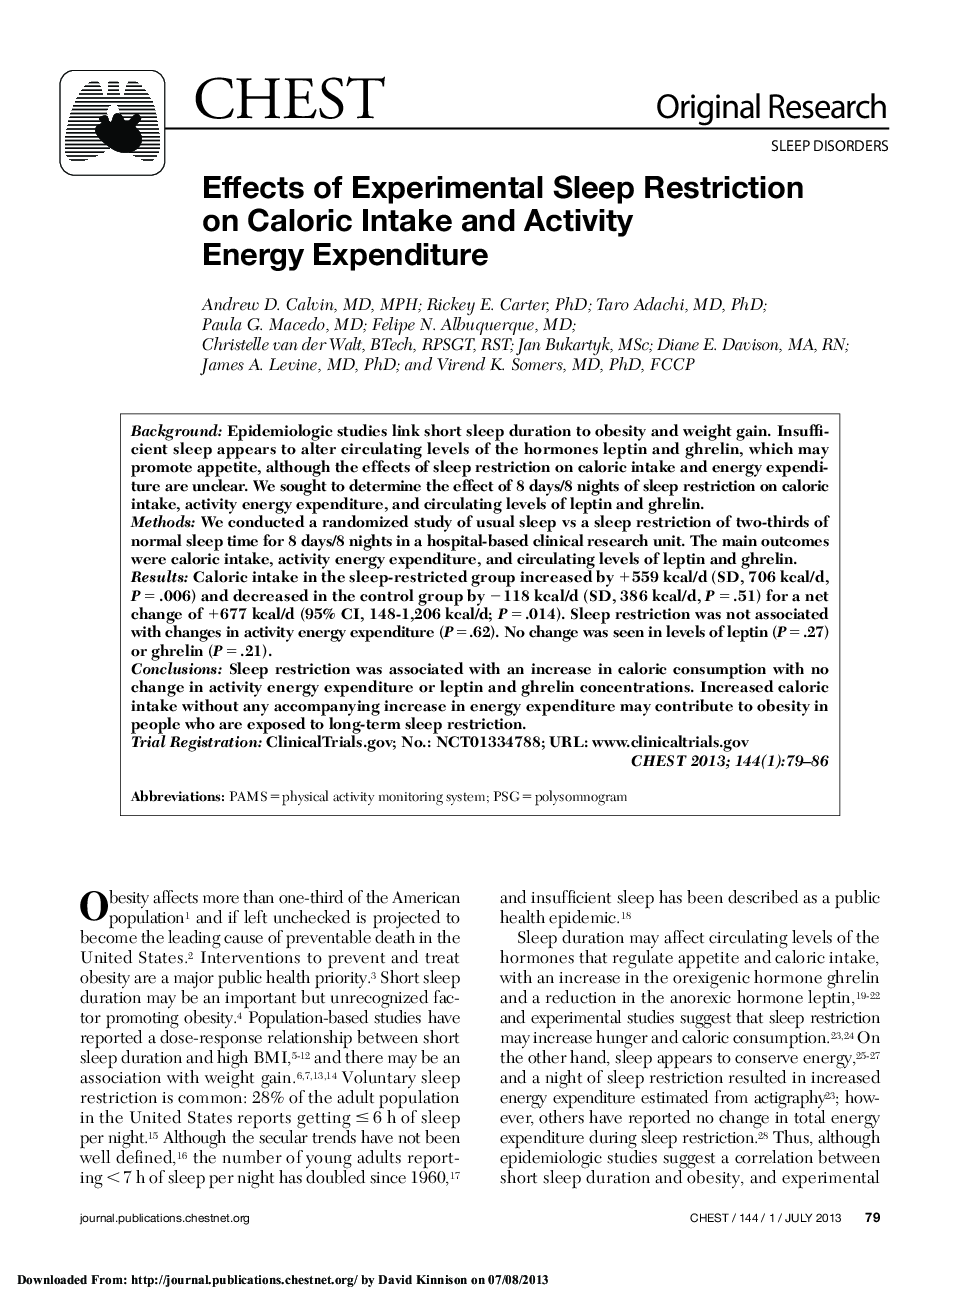 Effects of Experimental Sleep Restriction on Caloric Intake and Activity Energy Expenditure